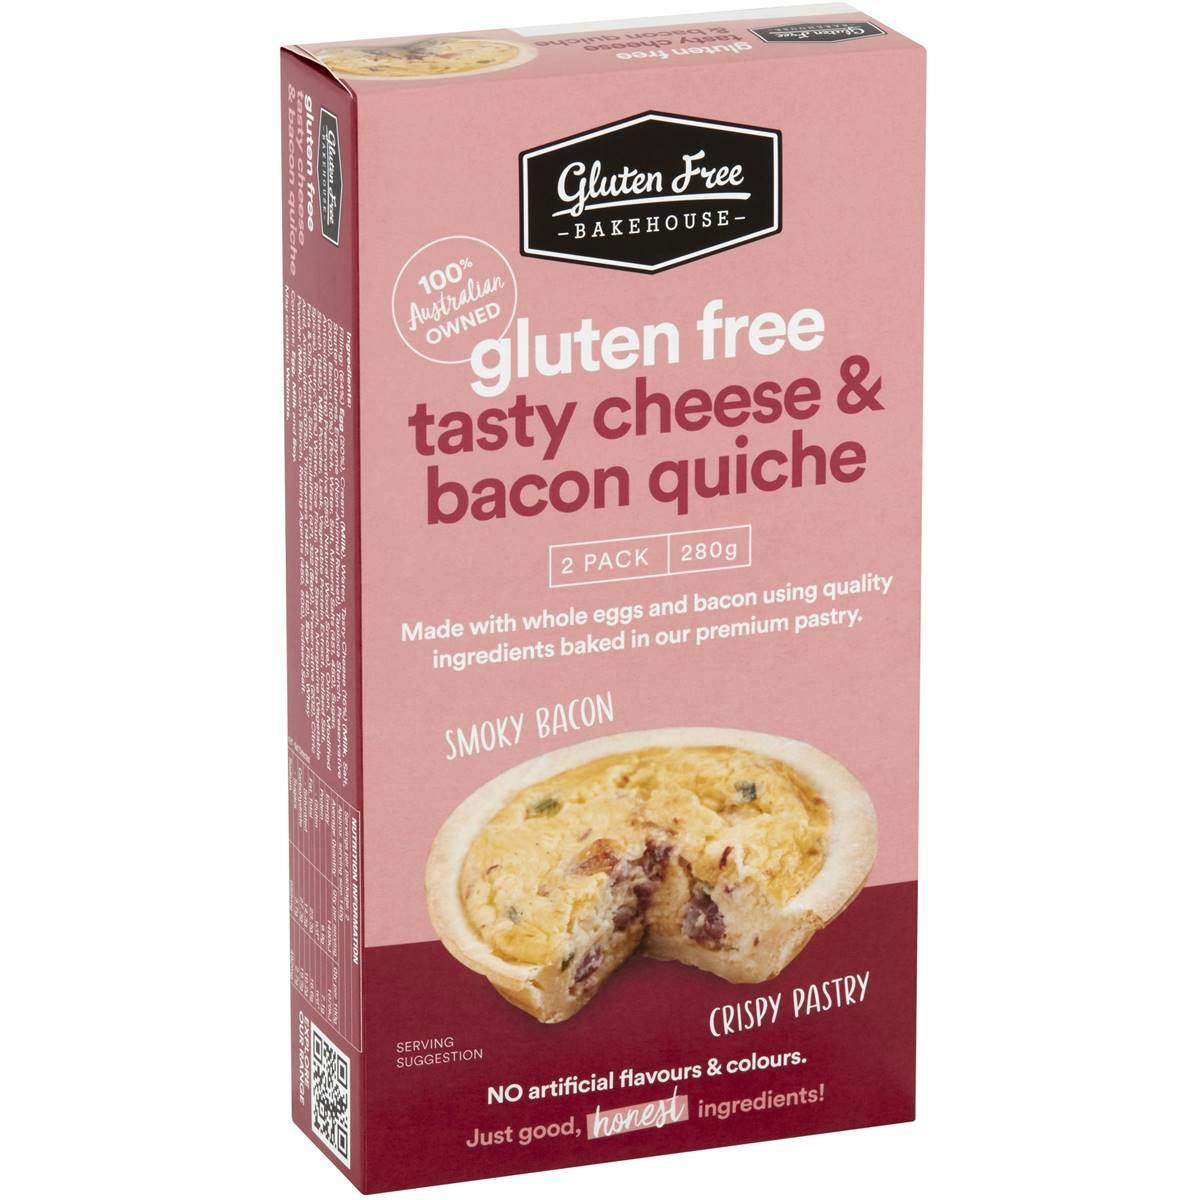 Gluten Free Bakehouse Tasty Cheese & Bacon Quiche 2 Pack